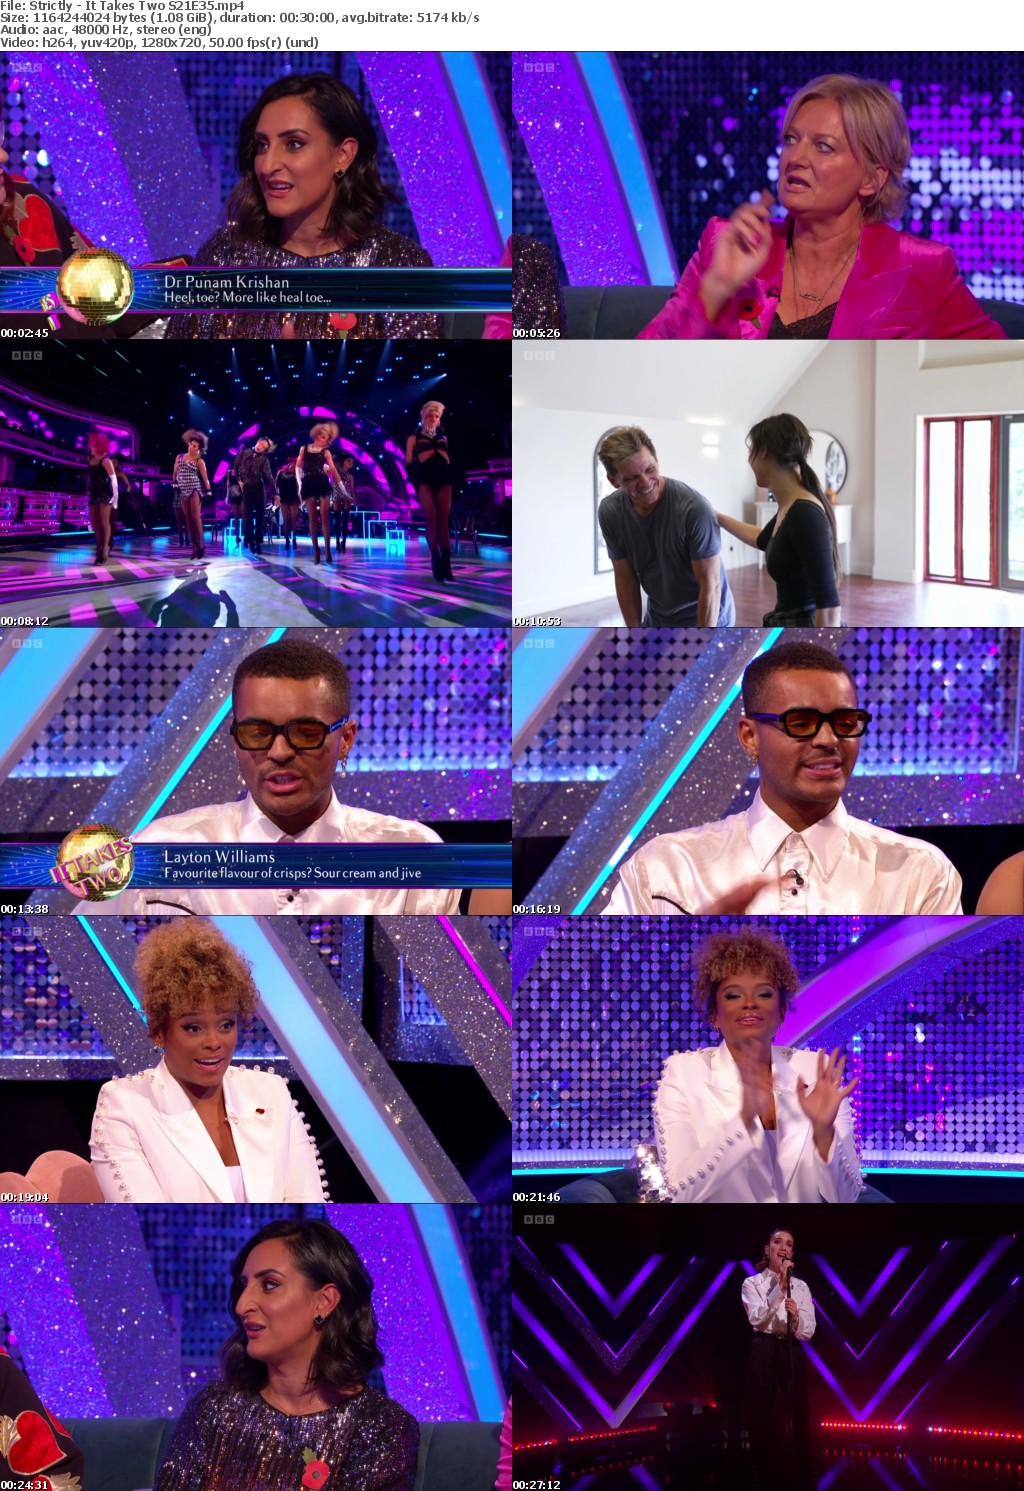 Strictly - It Takes Two S21E35 (1280x720p HD, 50fps, soft Eng subs)